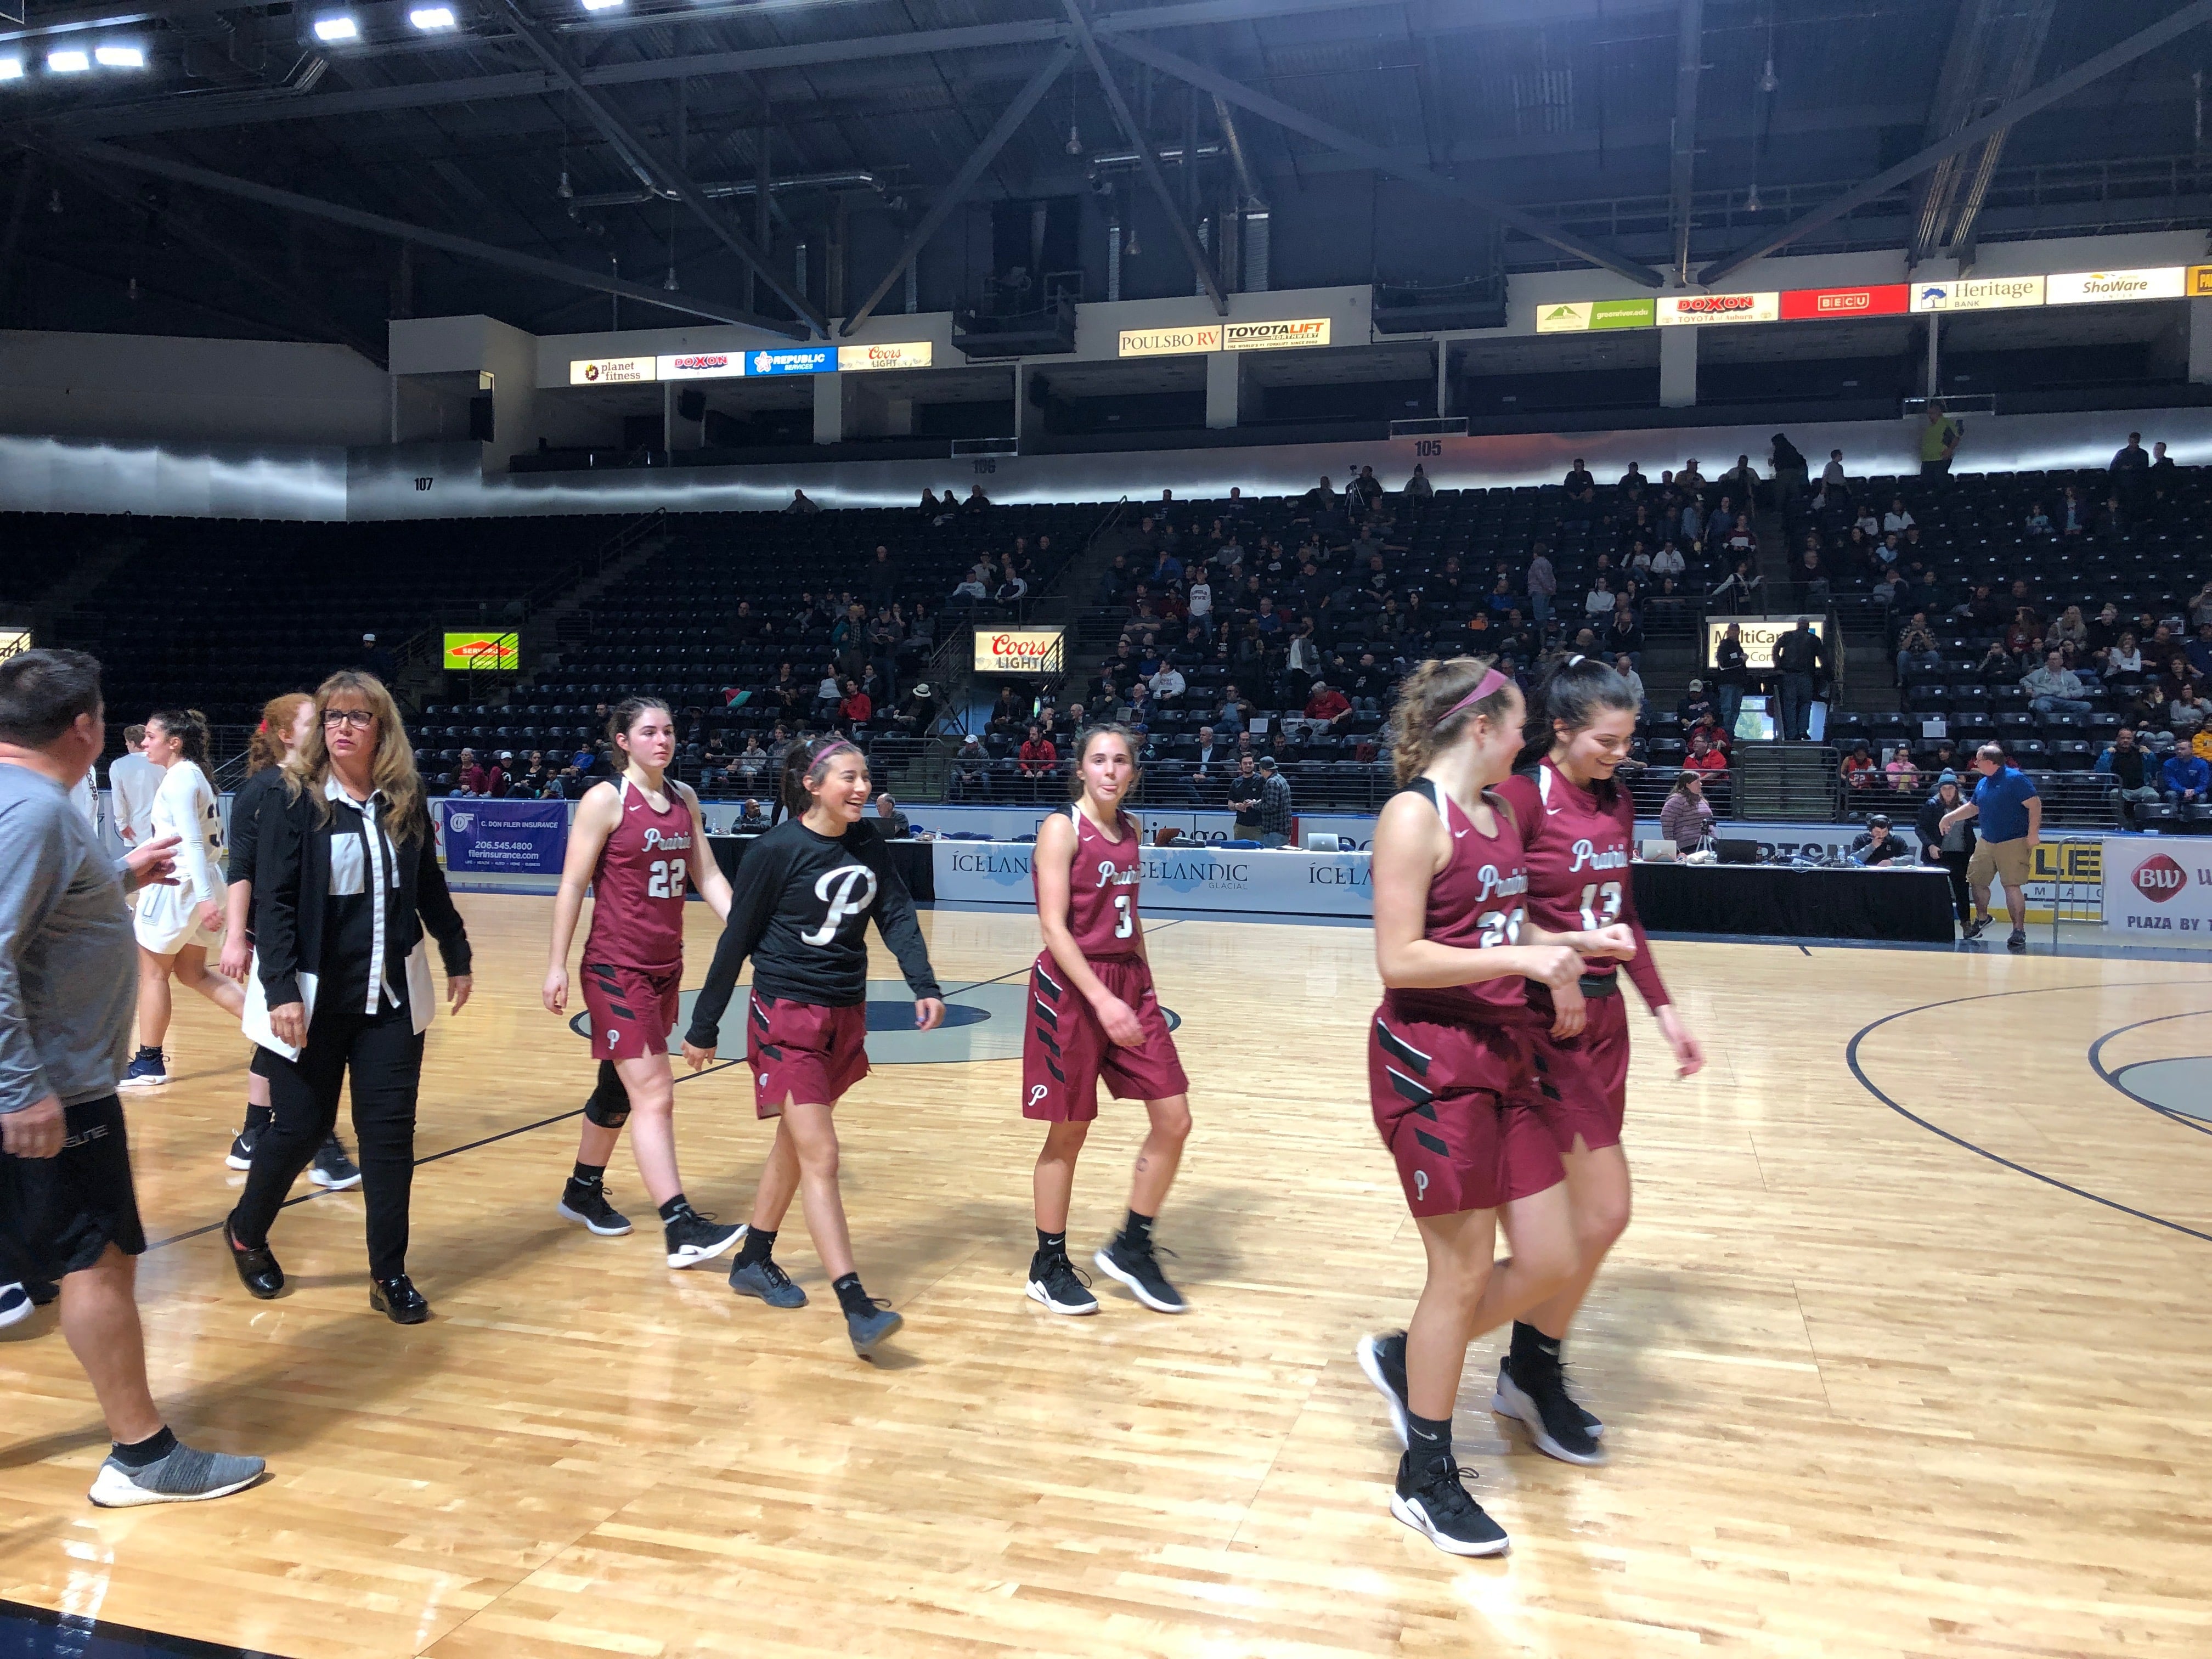 The Prairie girls basketball team walks off the ShoWare Center floor after beating No. 5-ranked West Seattle 58-50 in the King Showcase on Monday.